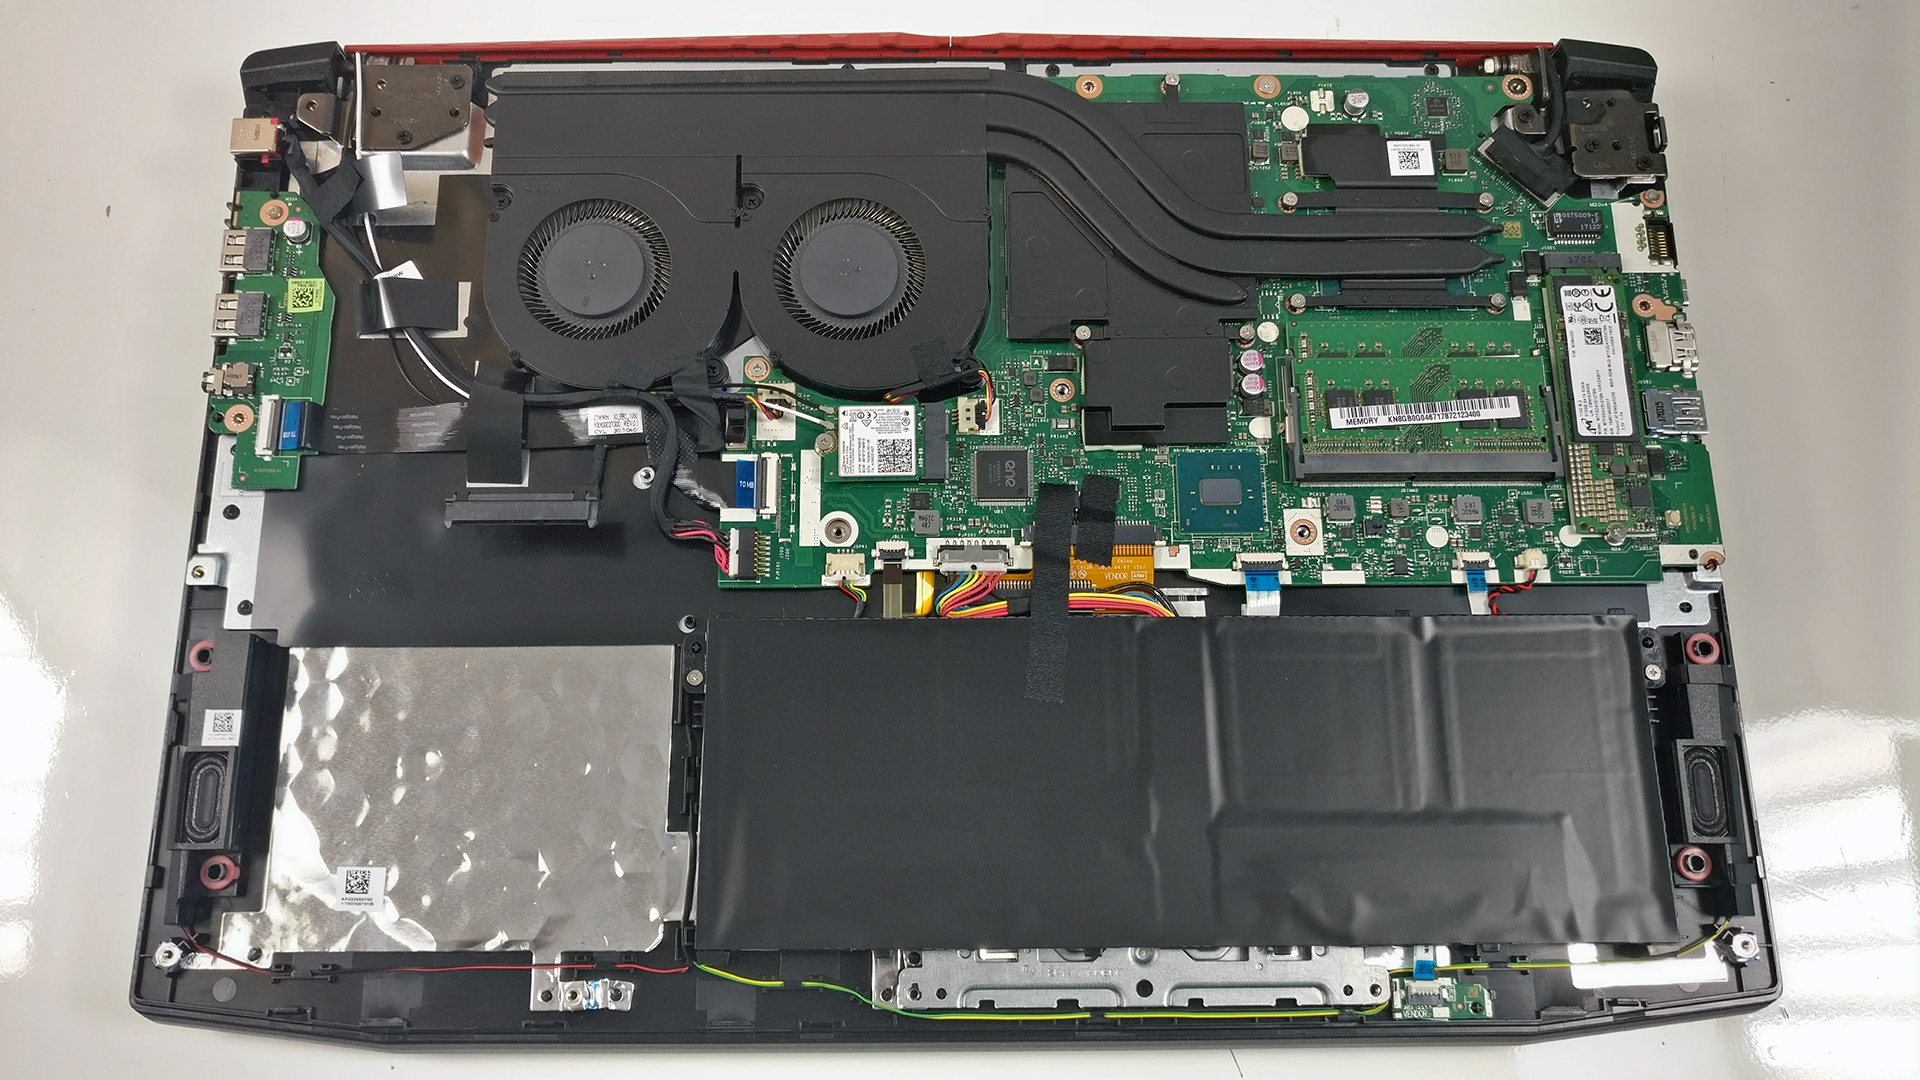 Inside Acer Predator Helios 300 (17-inch, PH317-51) - disassembly, photos and upgrade options |